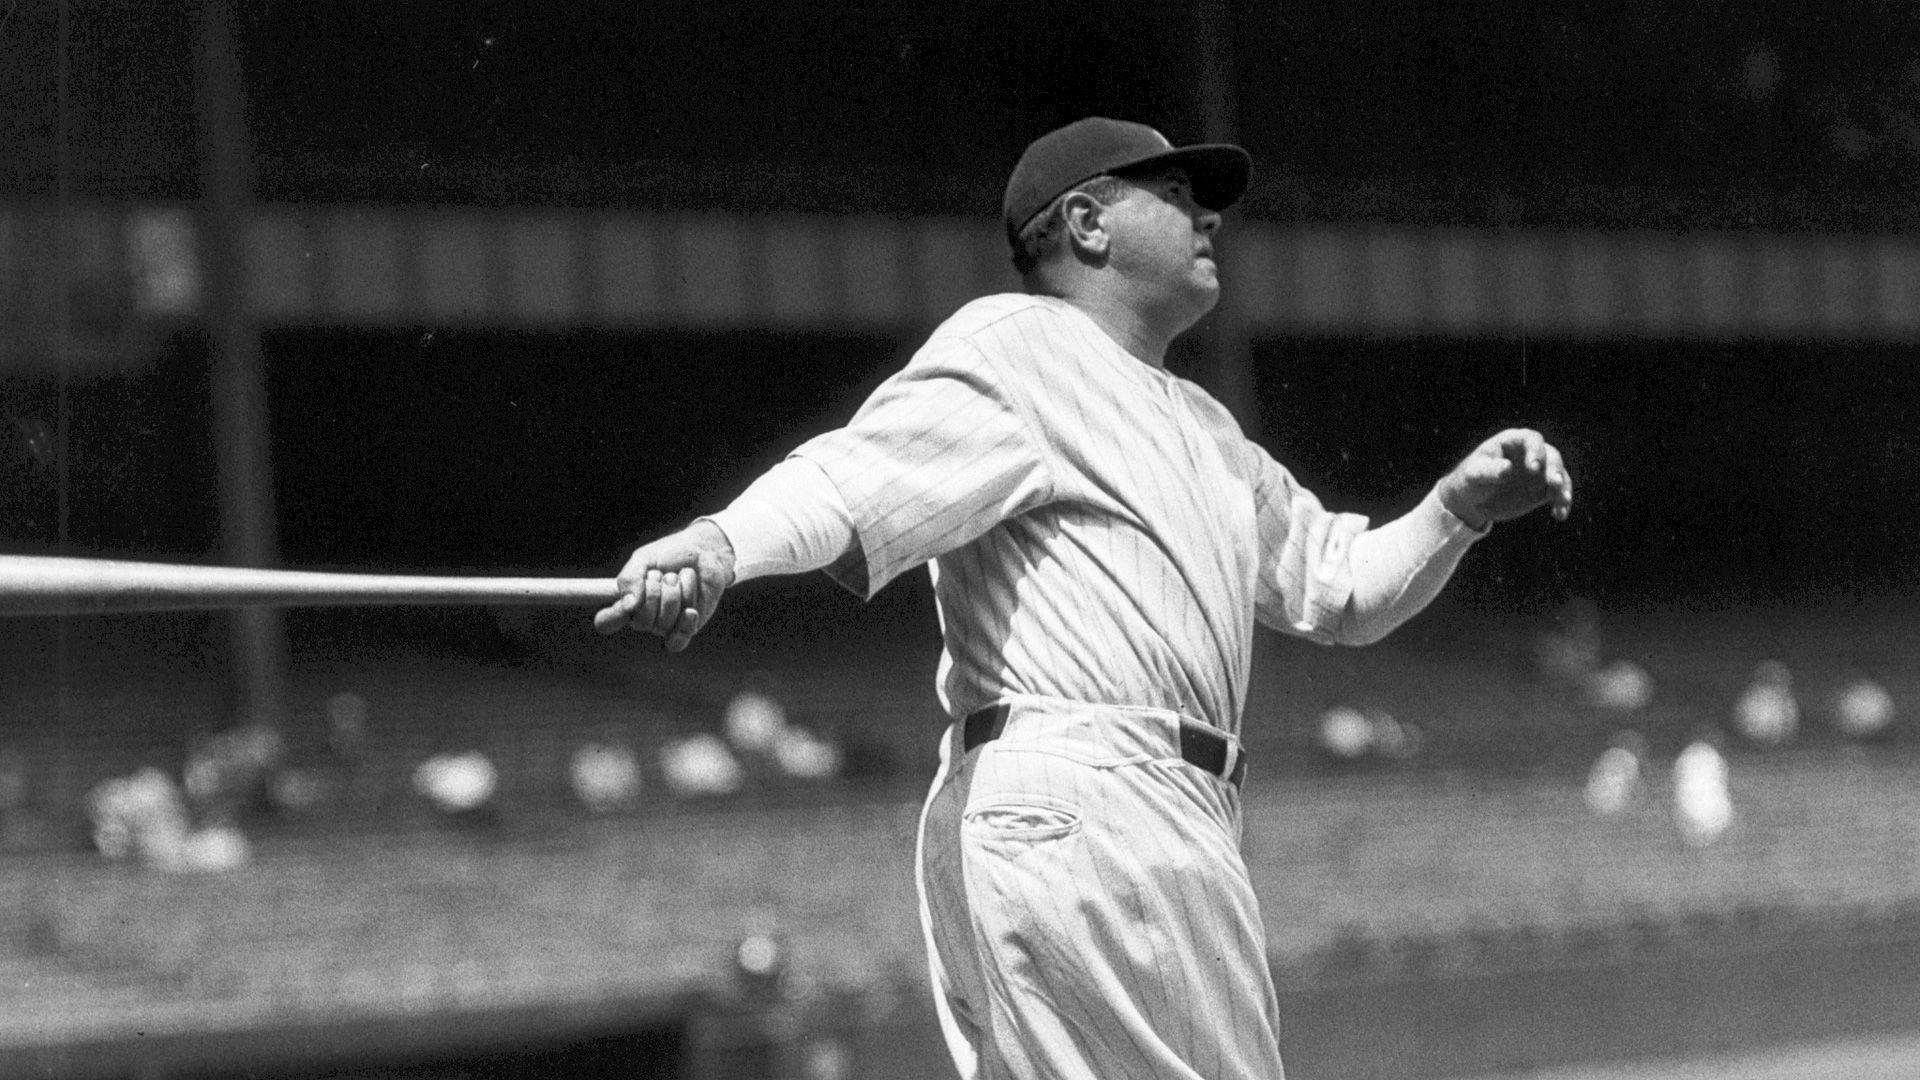 Babe Ruth played his last game 80 years ago today